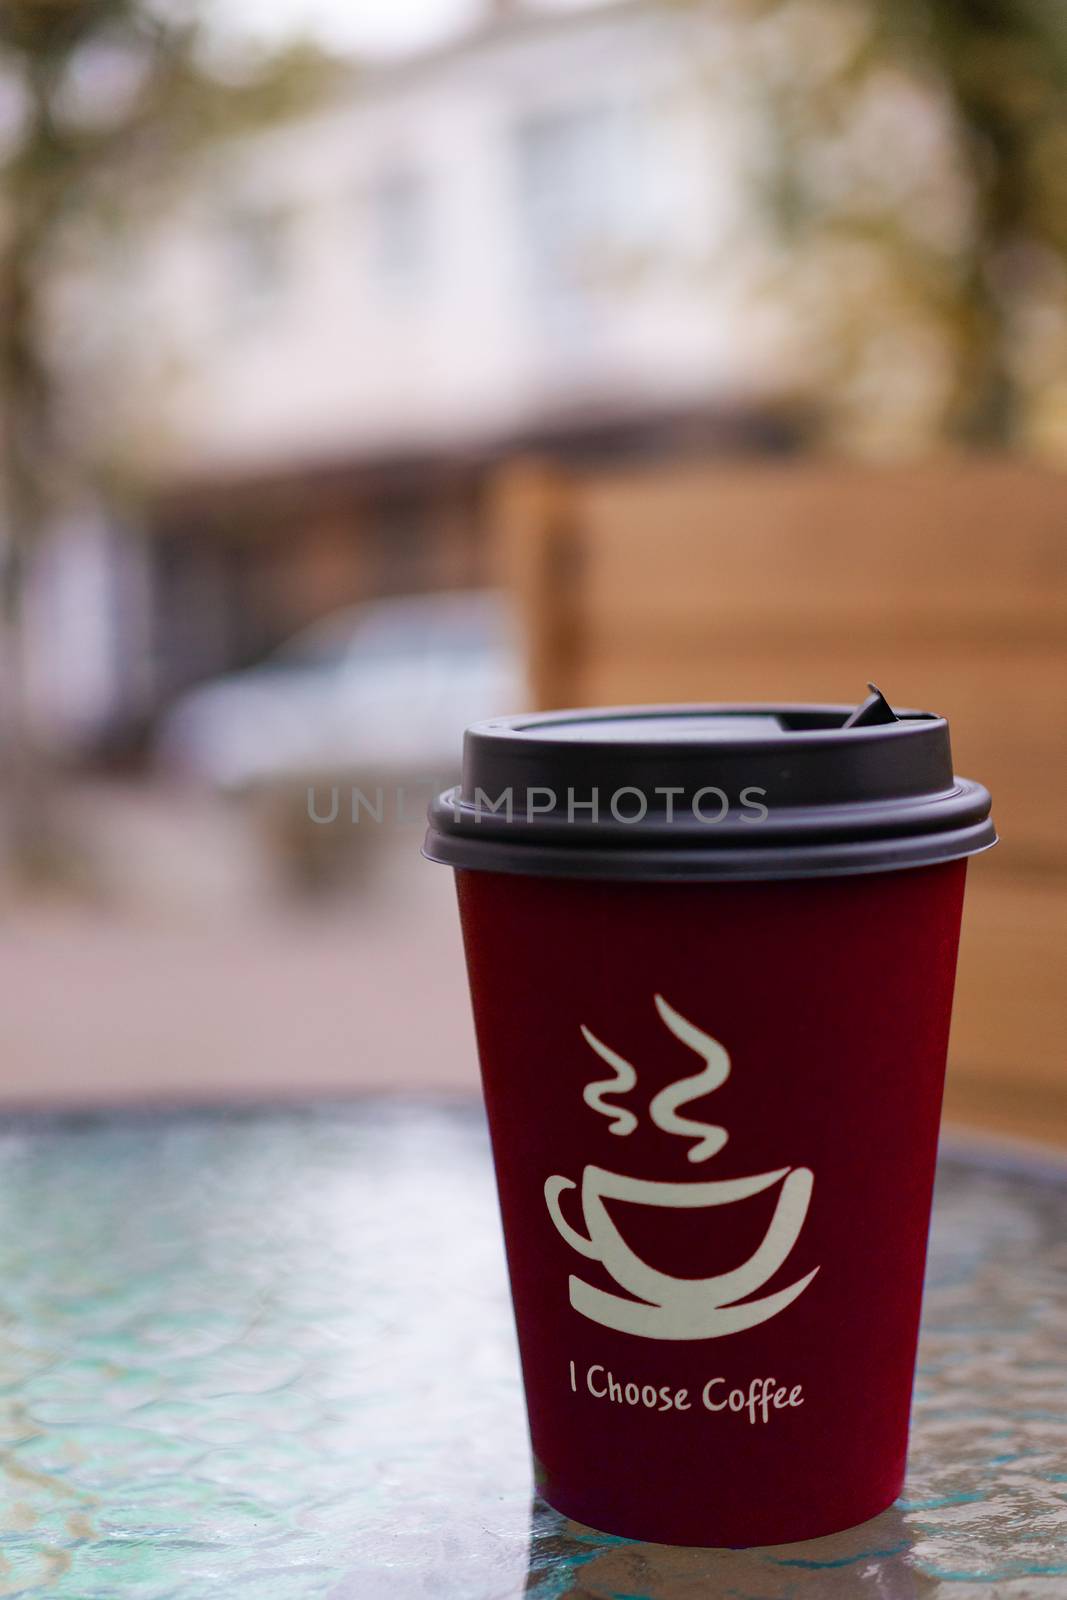 Red coffee paper cup on glass clear table. On cup wrote: "I choose coffee". Beginning a good day!